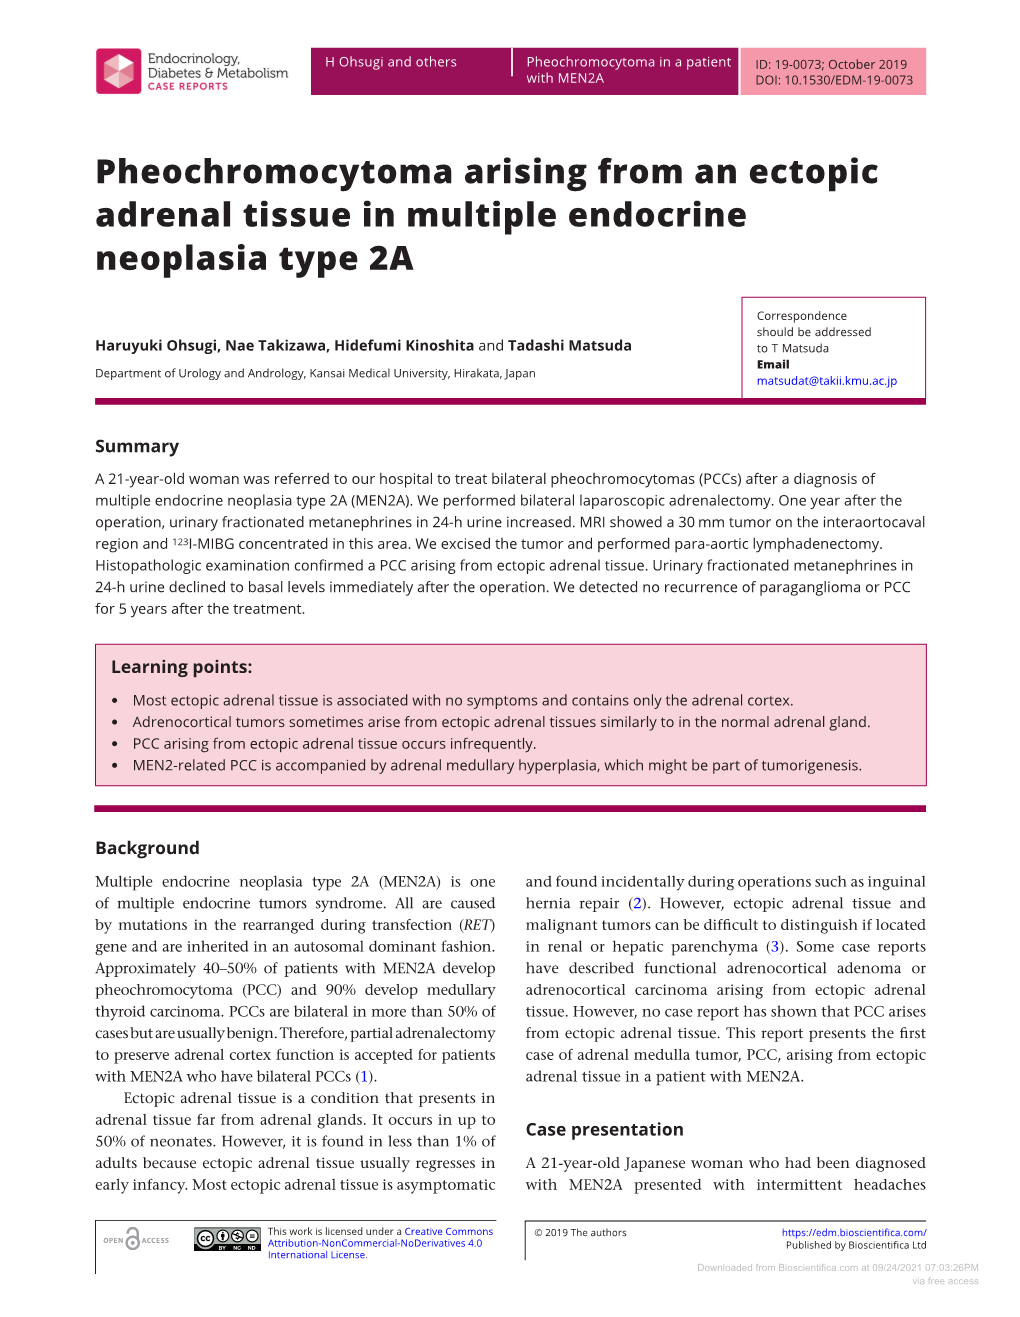 Pheochromocytoma Arising from an Ectopic Adrenal Tissue in Multiple Endocrine Neoplasia Type 2A